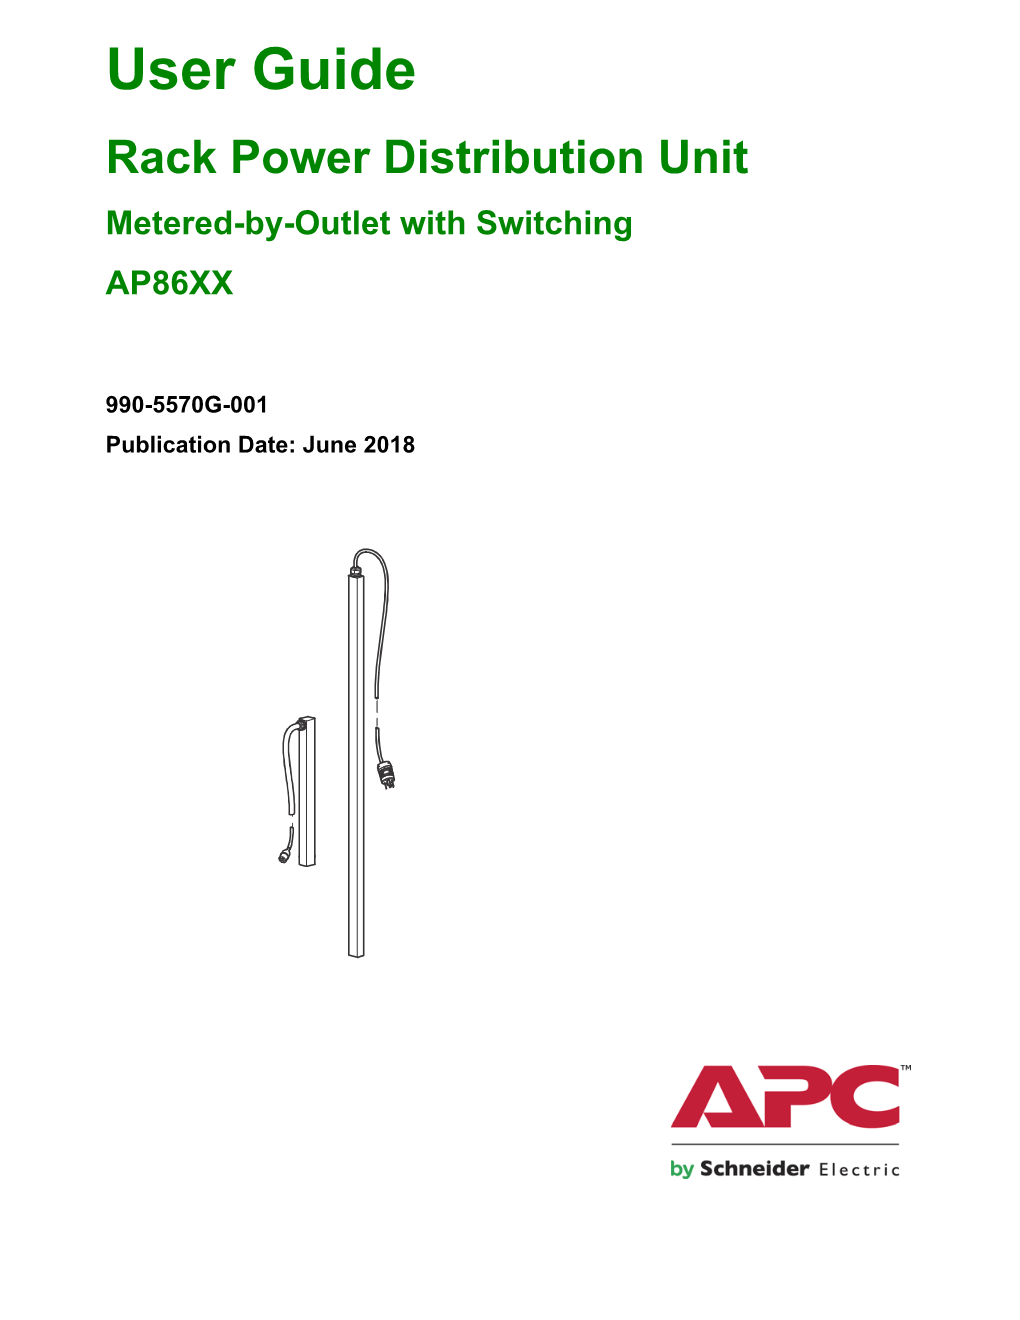 User Guide Rack Power Distribution Unit Metered-By-Outlet with Switching AP86XX